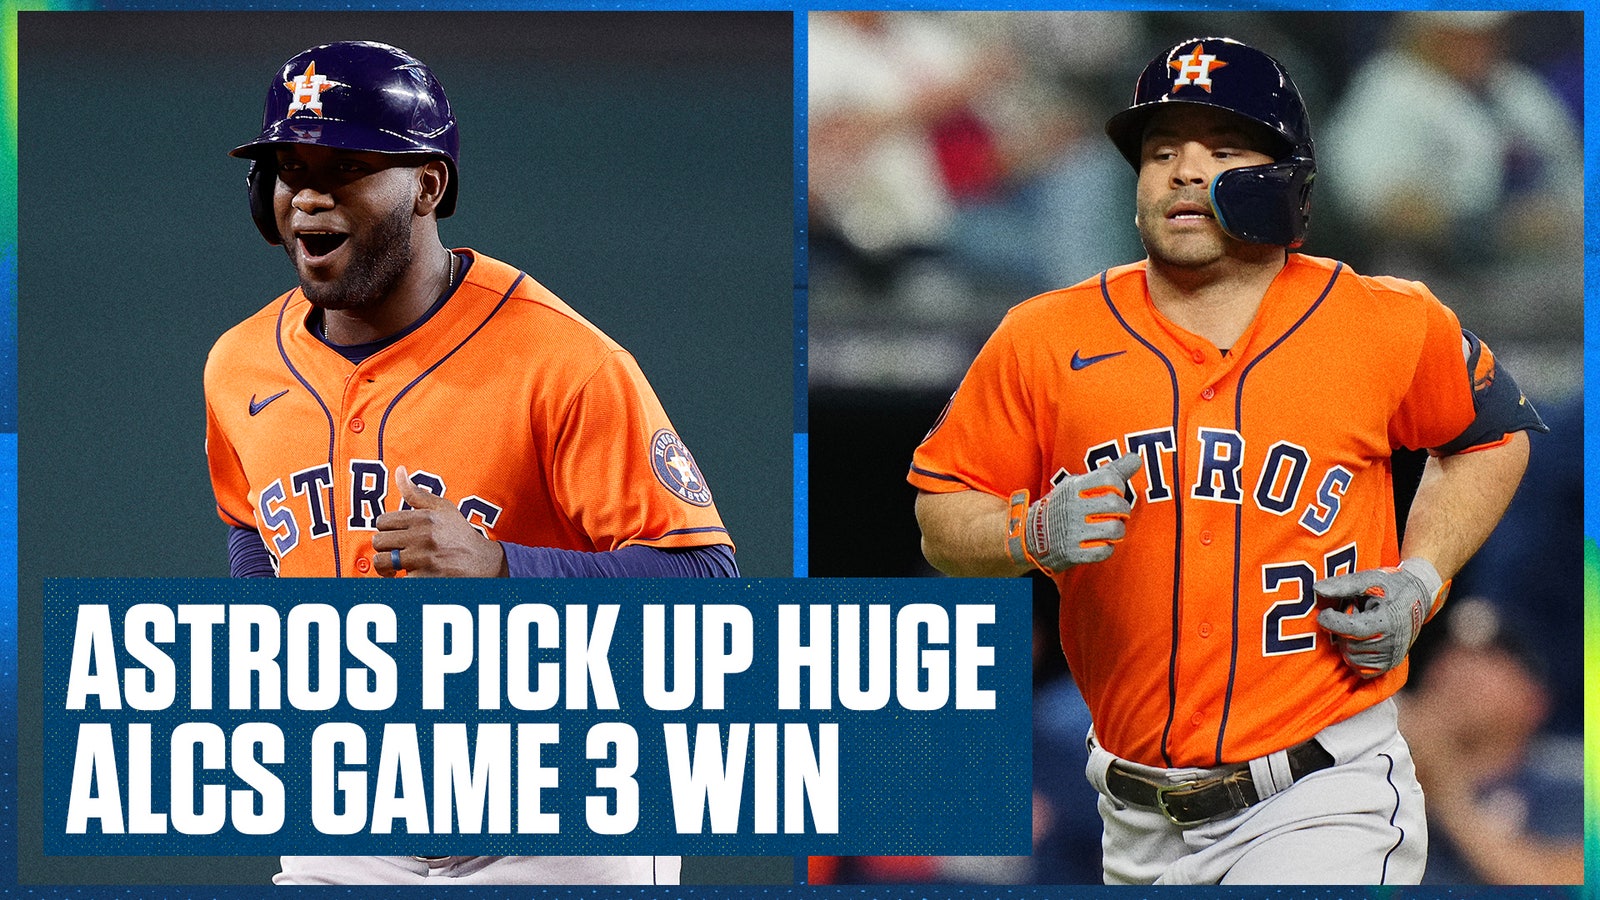 Houston Astros stay alive with a 8-5 road win over the Texas Rangers in ALCS Game 3